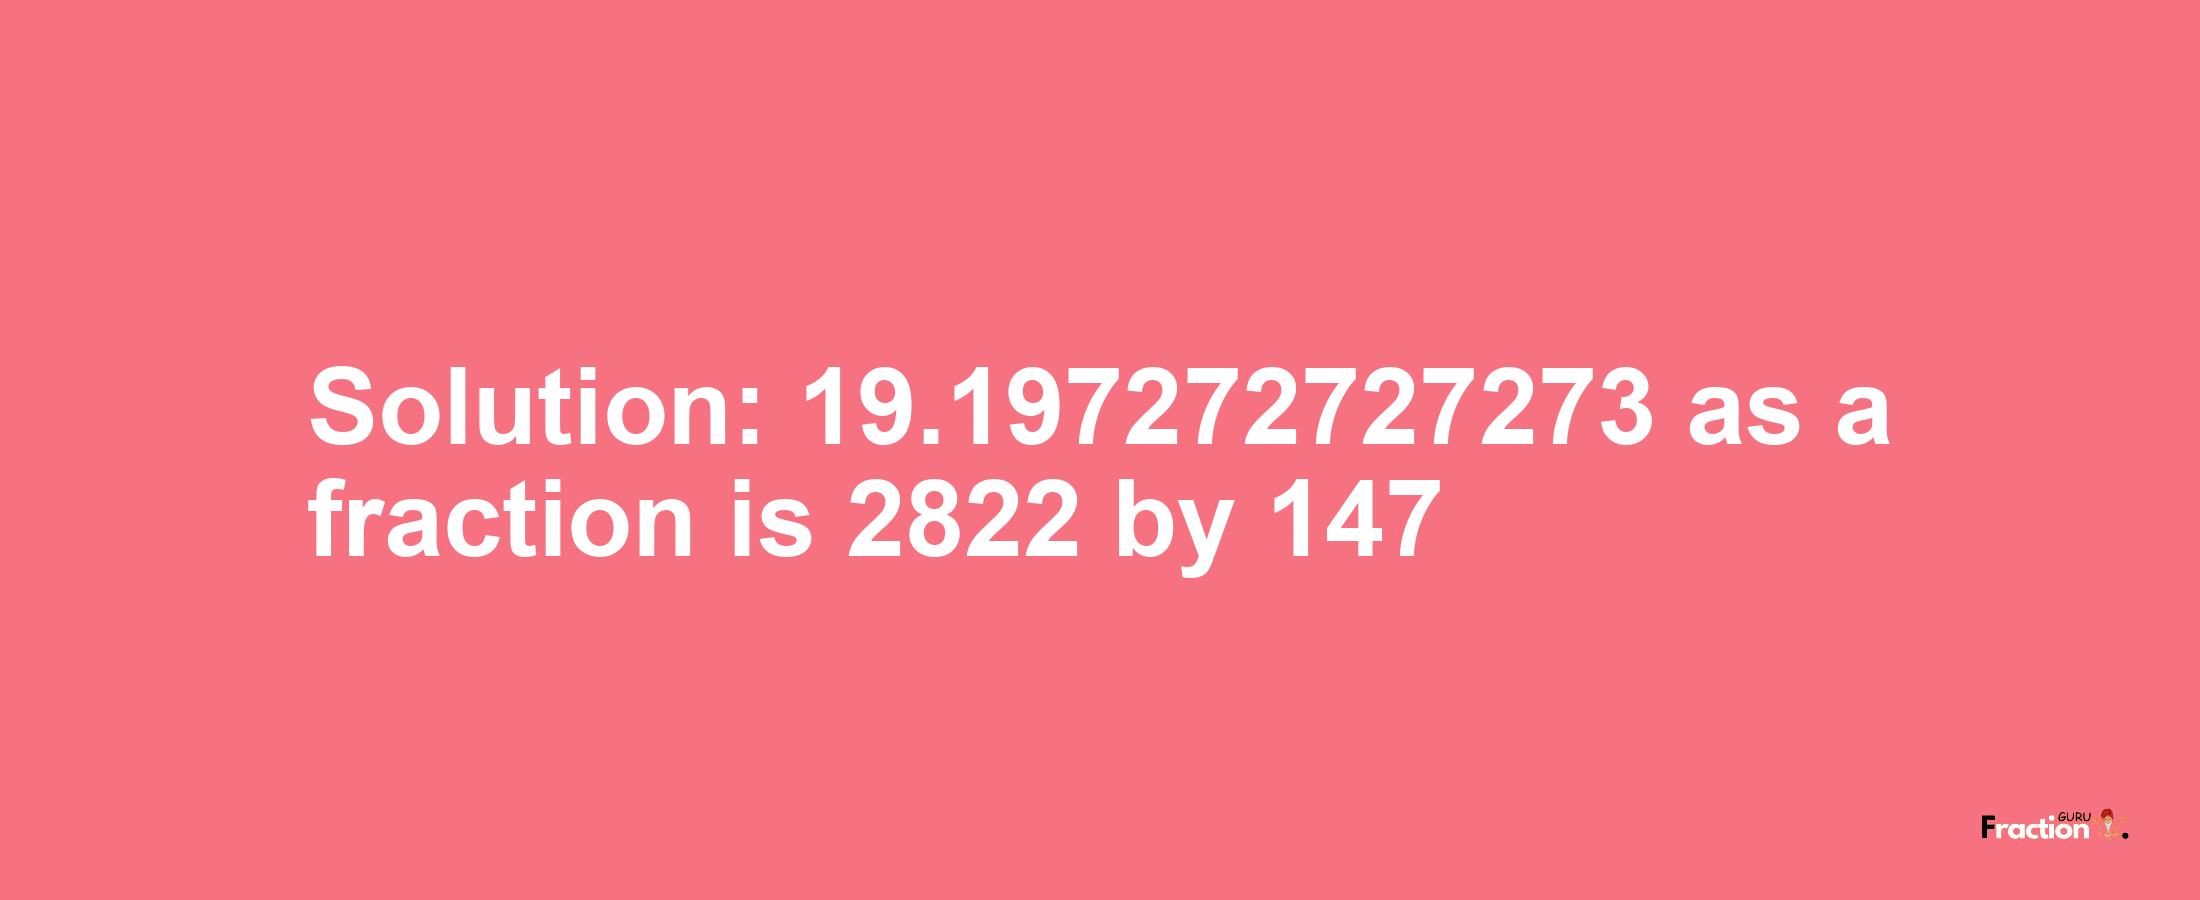 Solution:19.197272727273 as a fraction is 2822/147